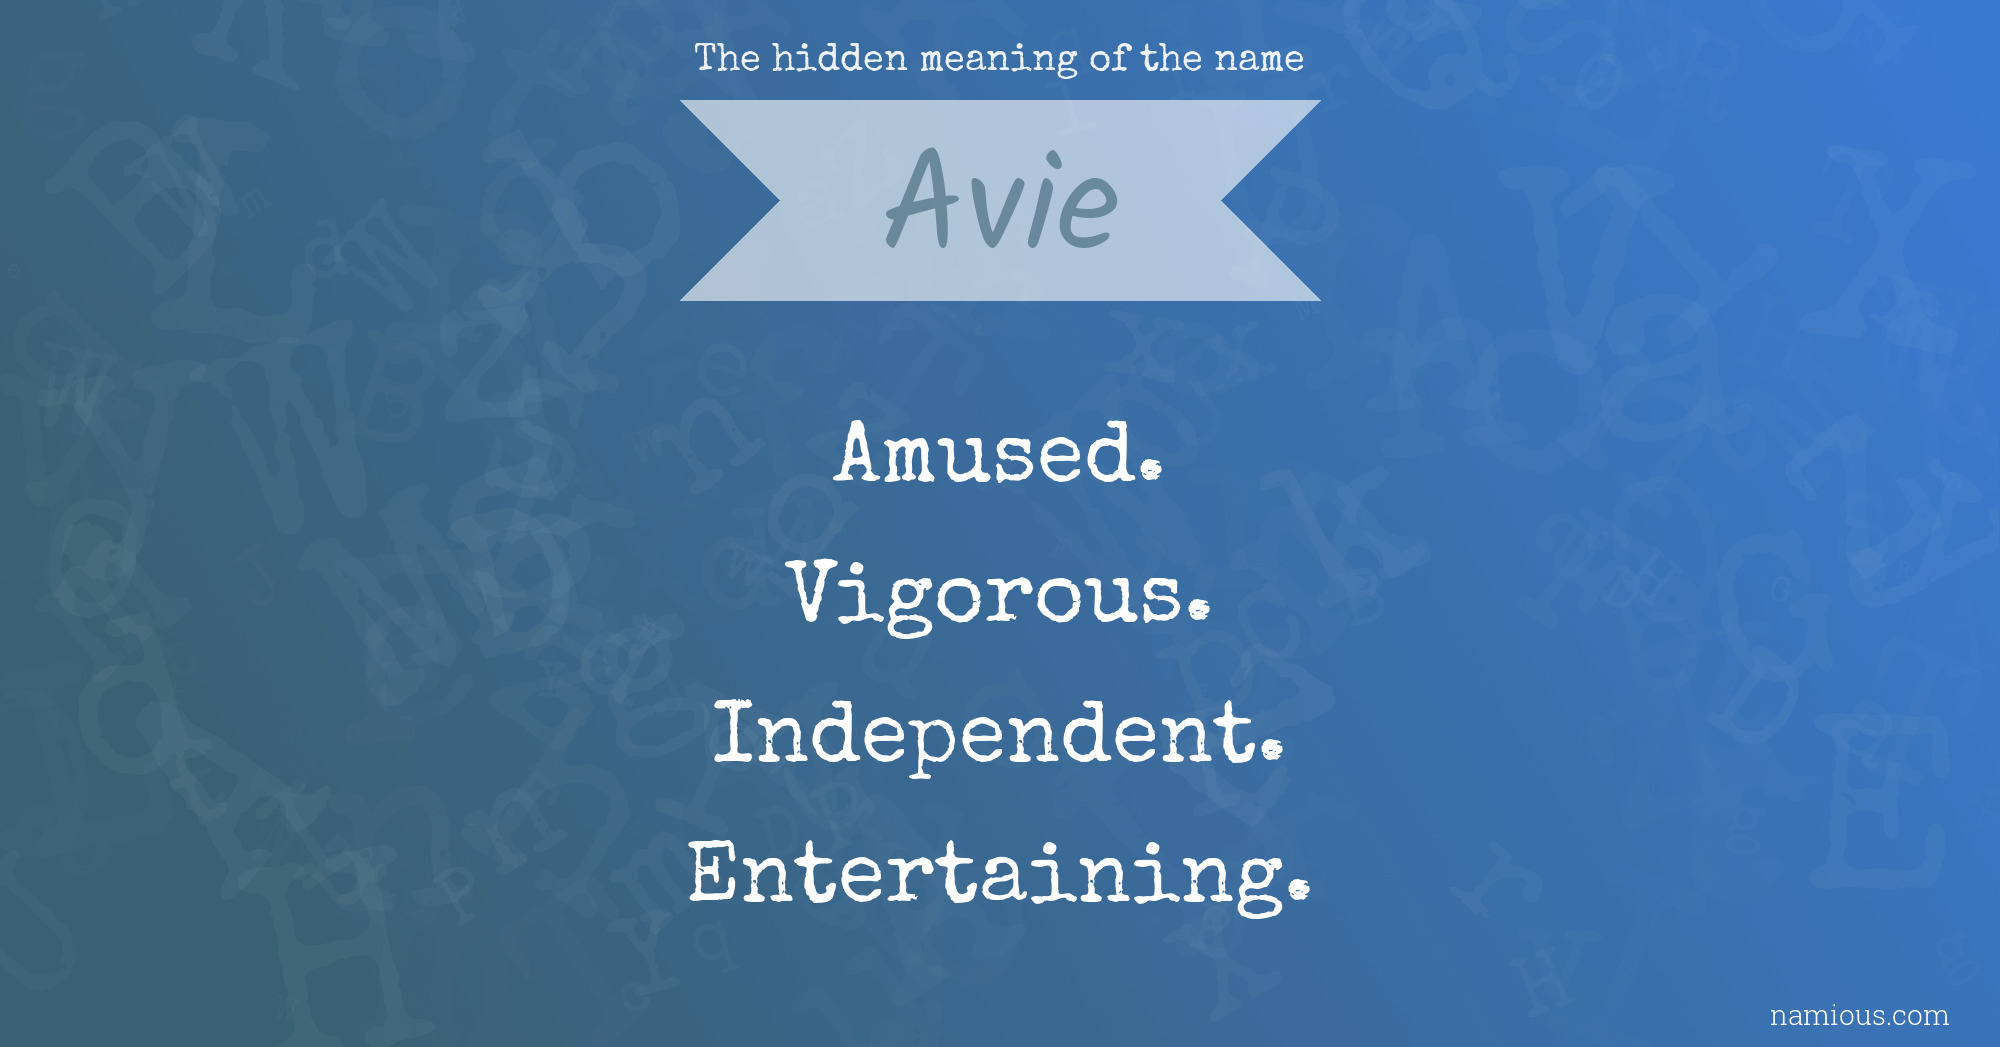 The hidden meaning of the name Avie